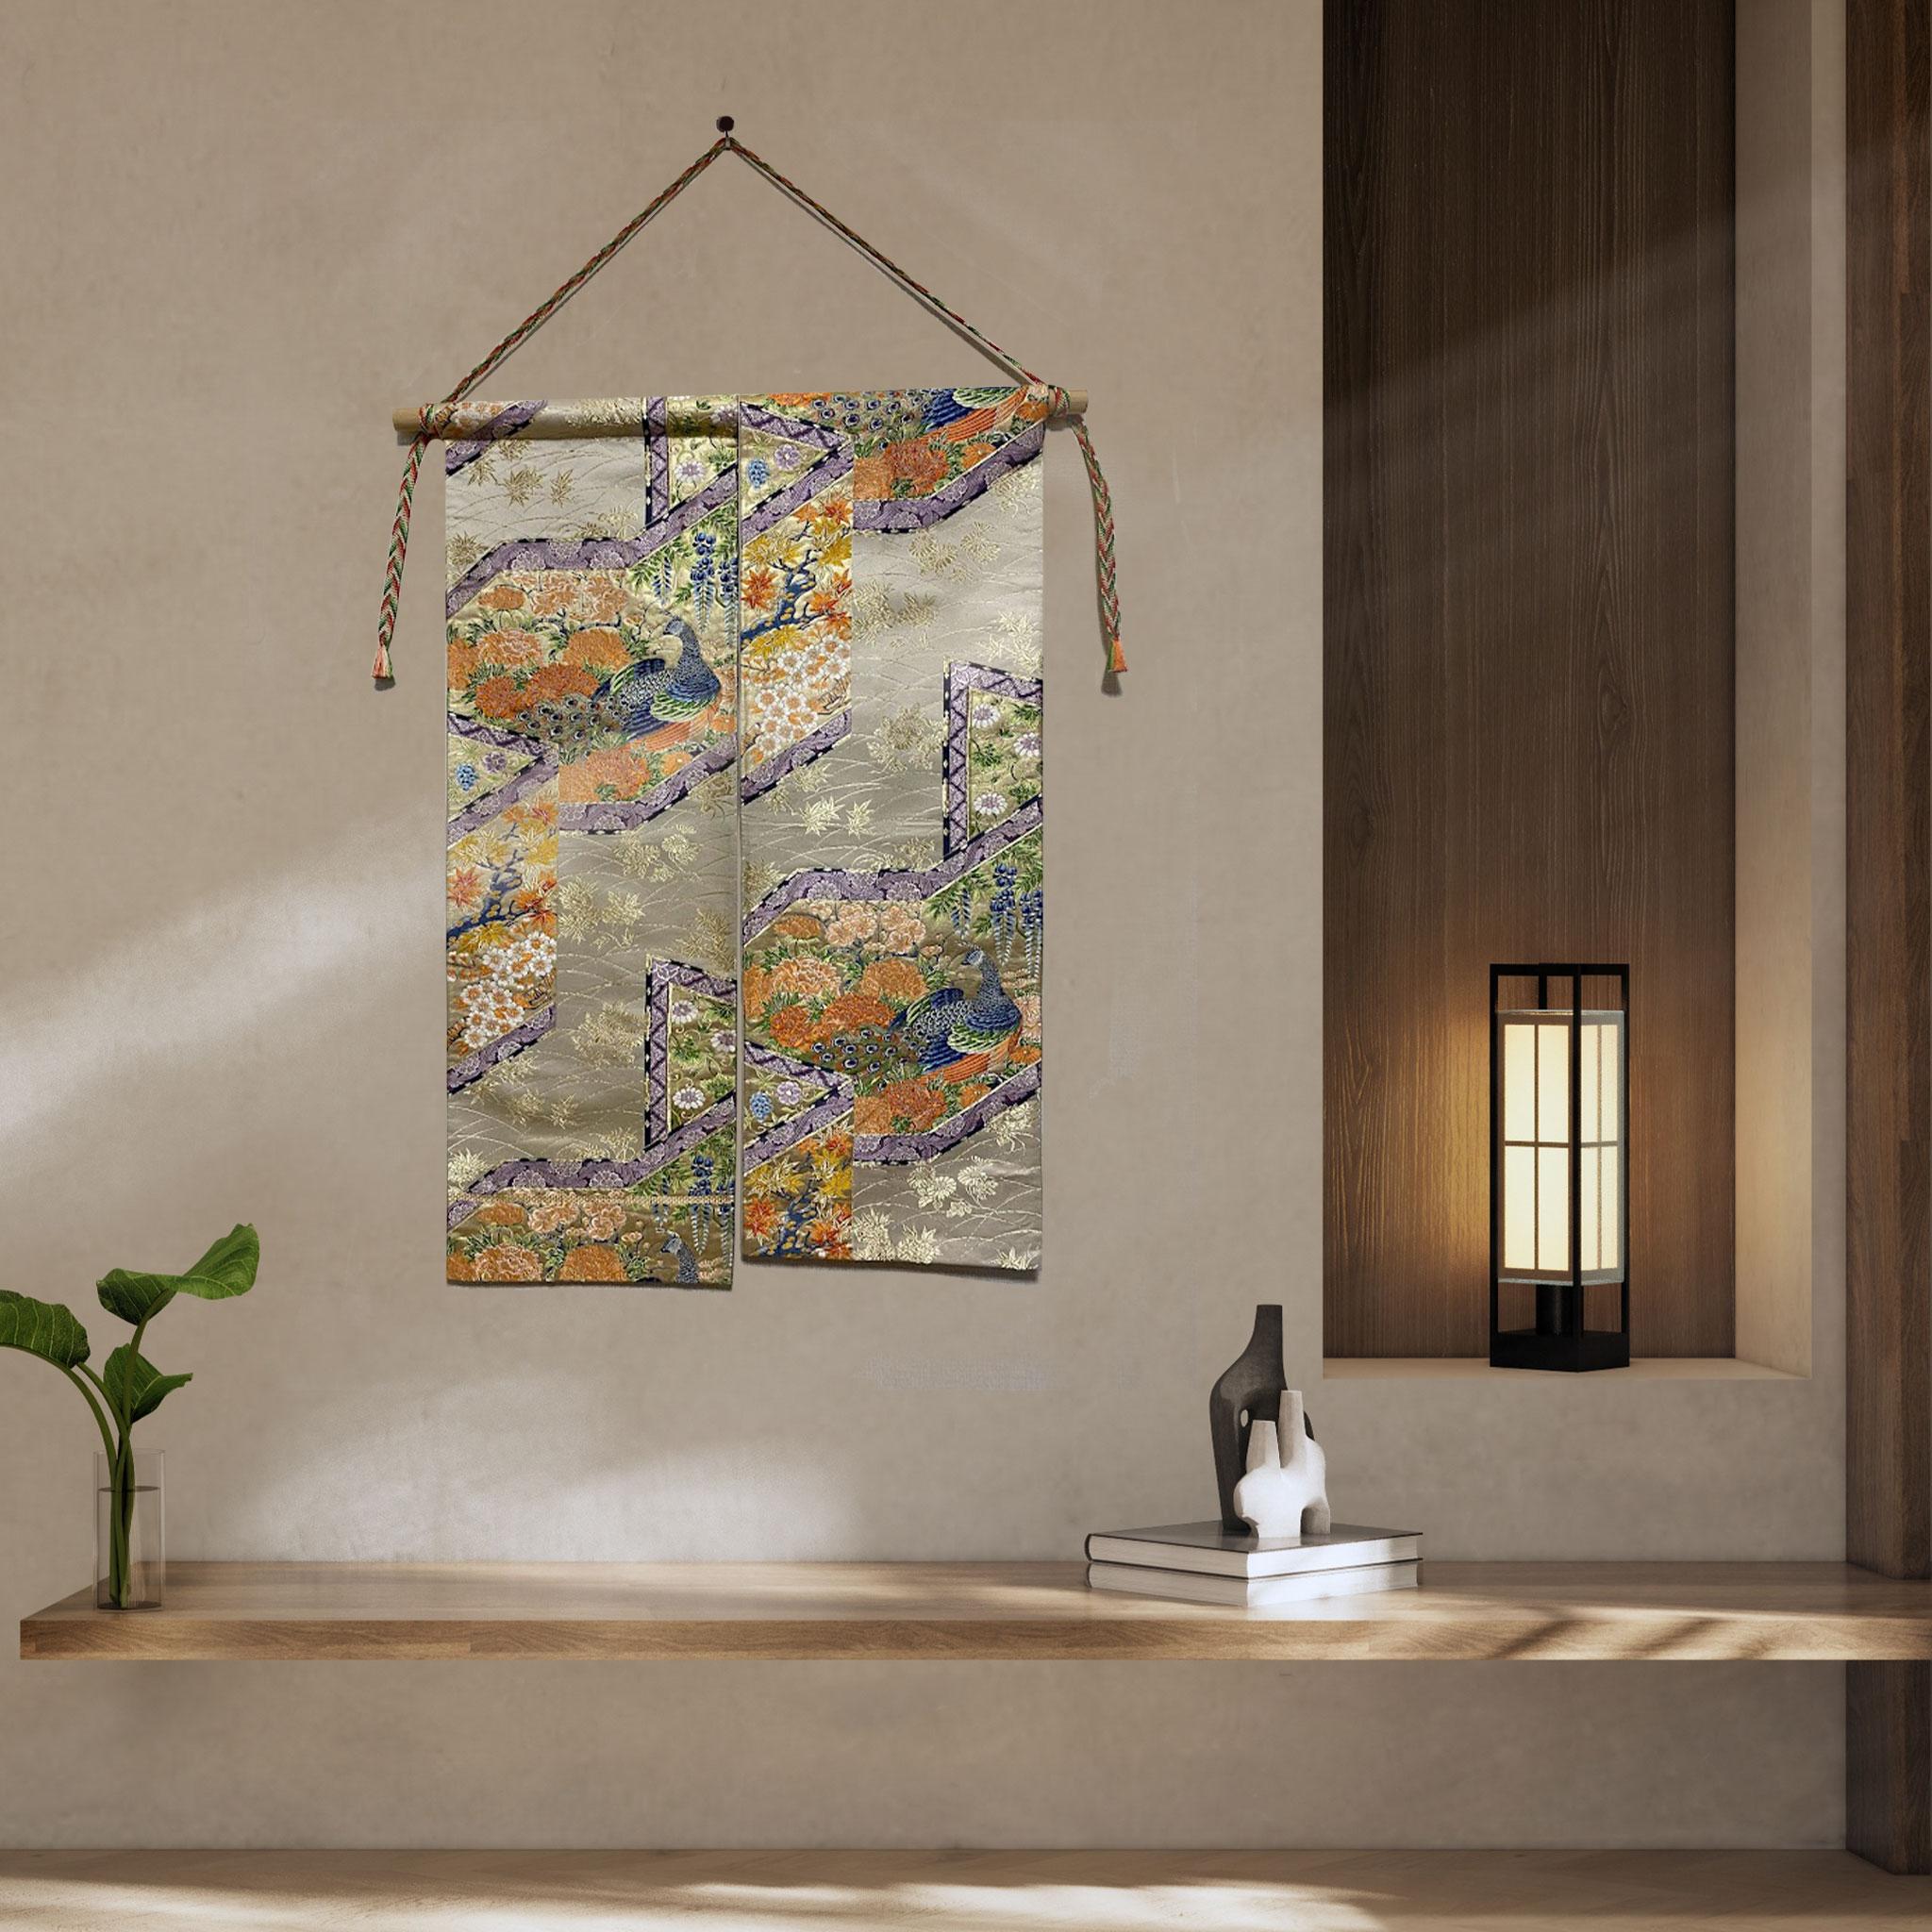 This Kimono Tapestry, carefully and painstakingly embroidered by Japanese craftsmen, is the only one of its kind in the world.

 We are proud to present this tapestry, embroidered with peacocks and flowers of the Four Seasons on a silk fabric based